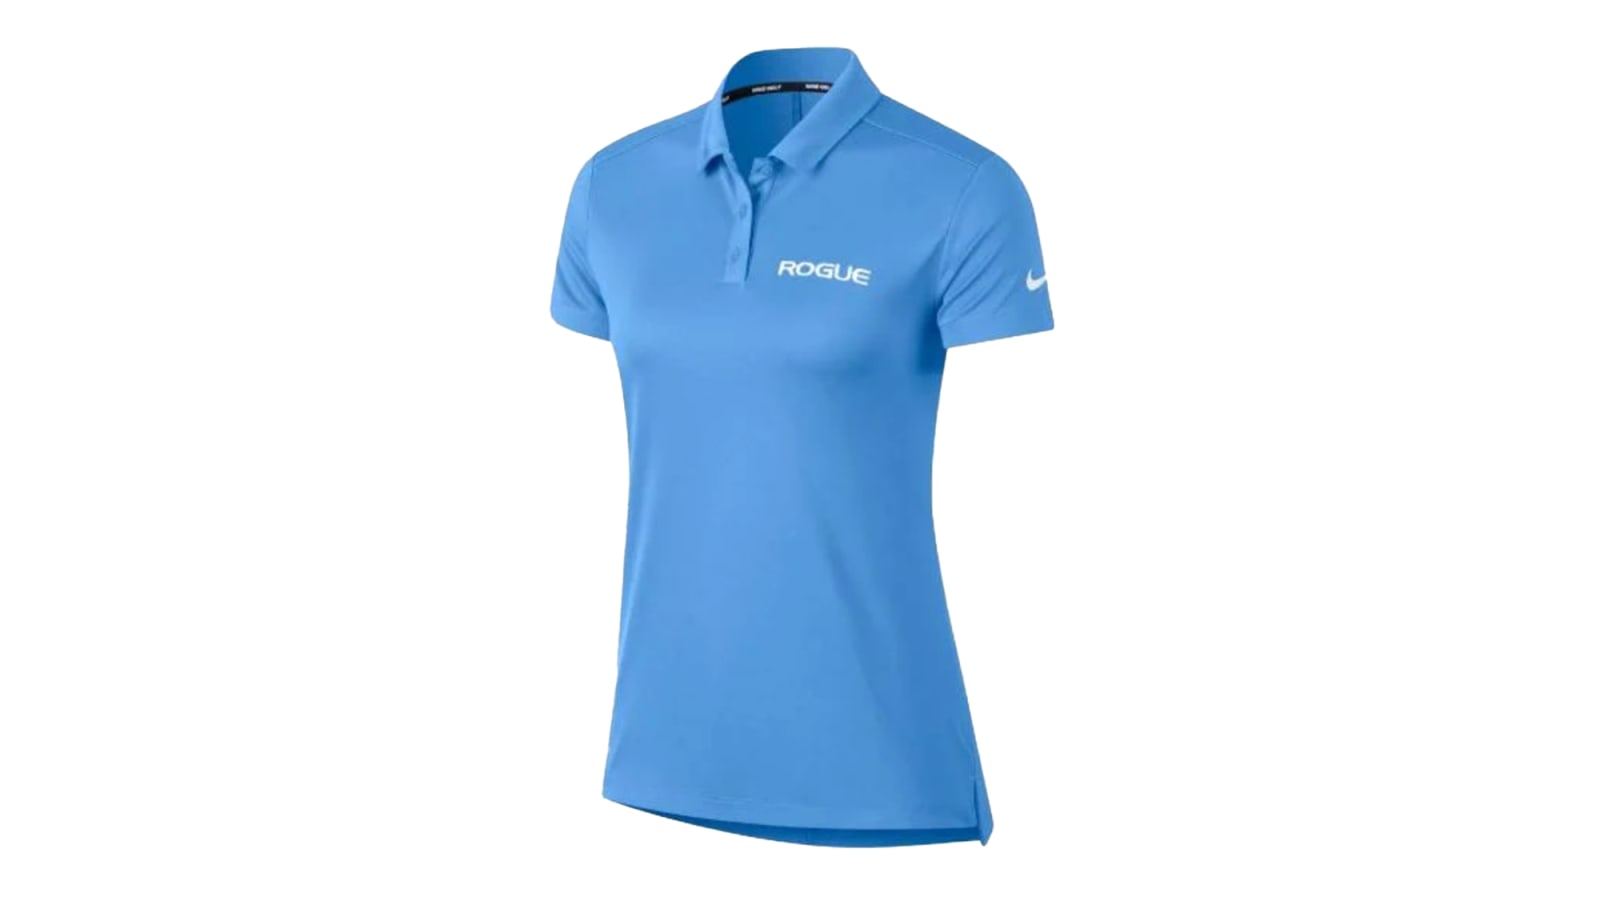 lugt bagagerum Snestorm Nike Dri Fit Polo - Women's - Blue | Rogue Fitness